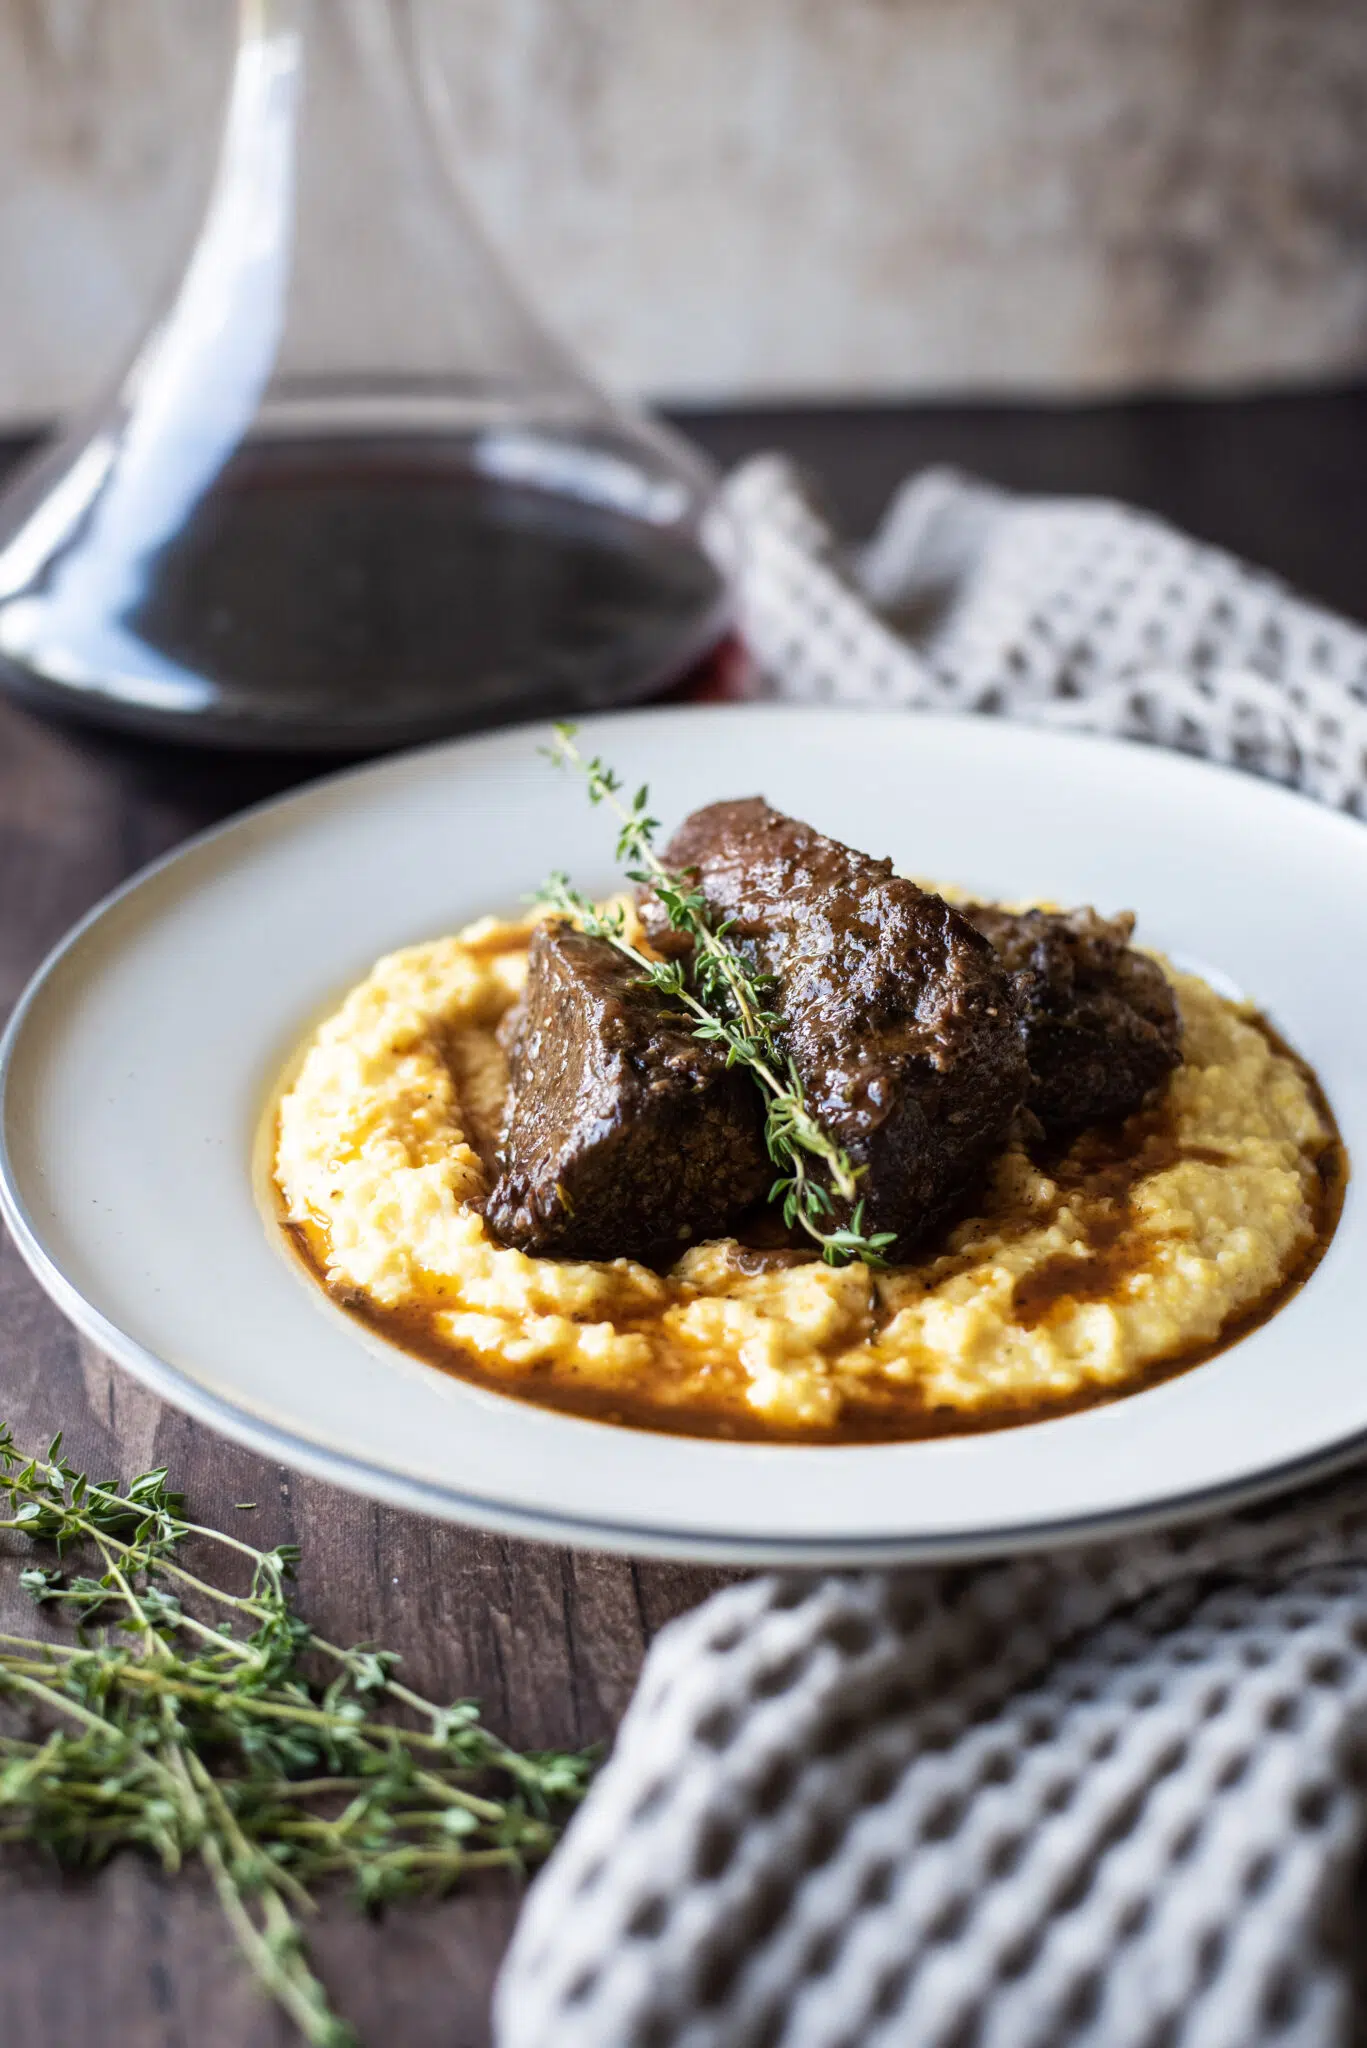 Braised Short Ribs with Grits and red wine